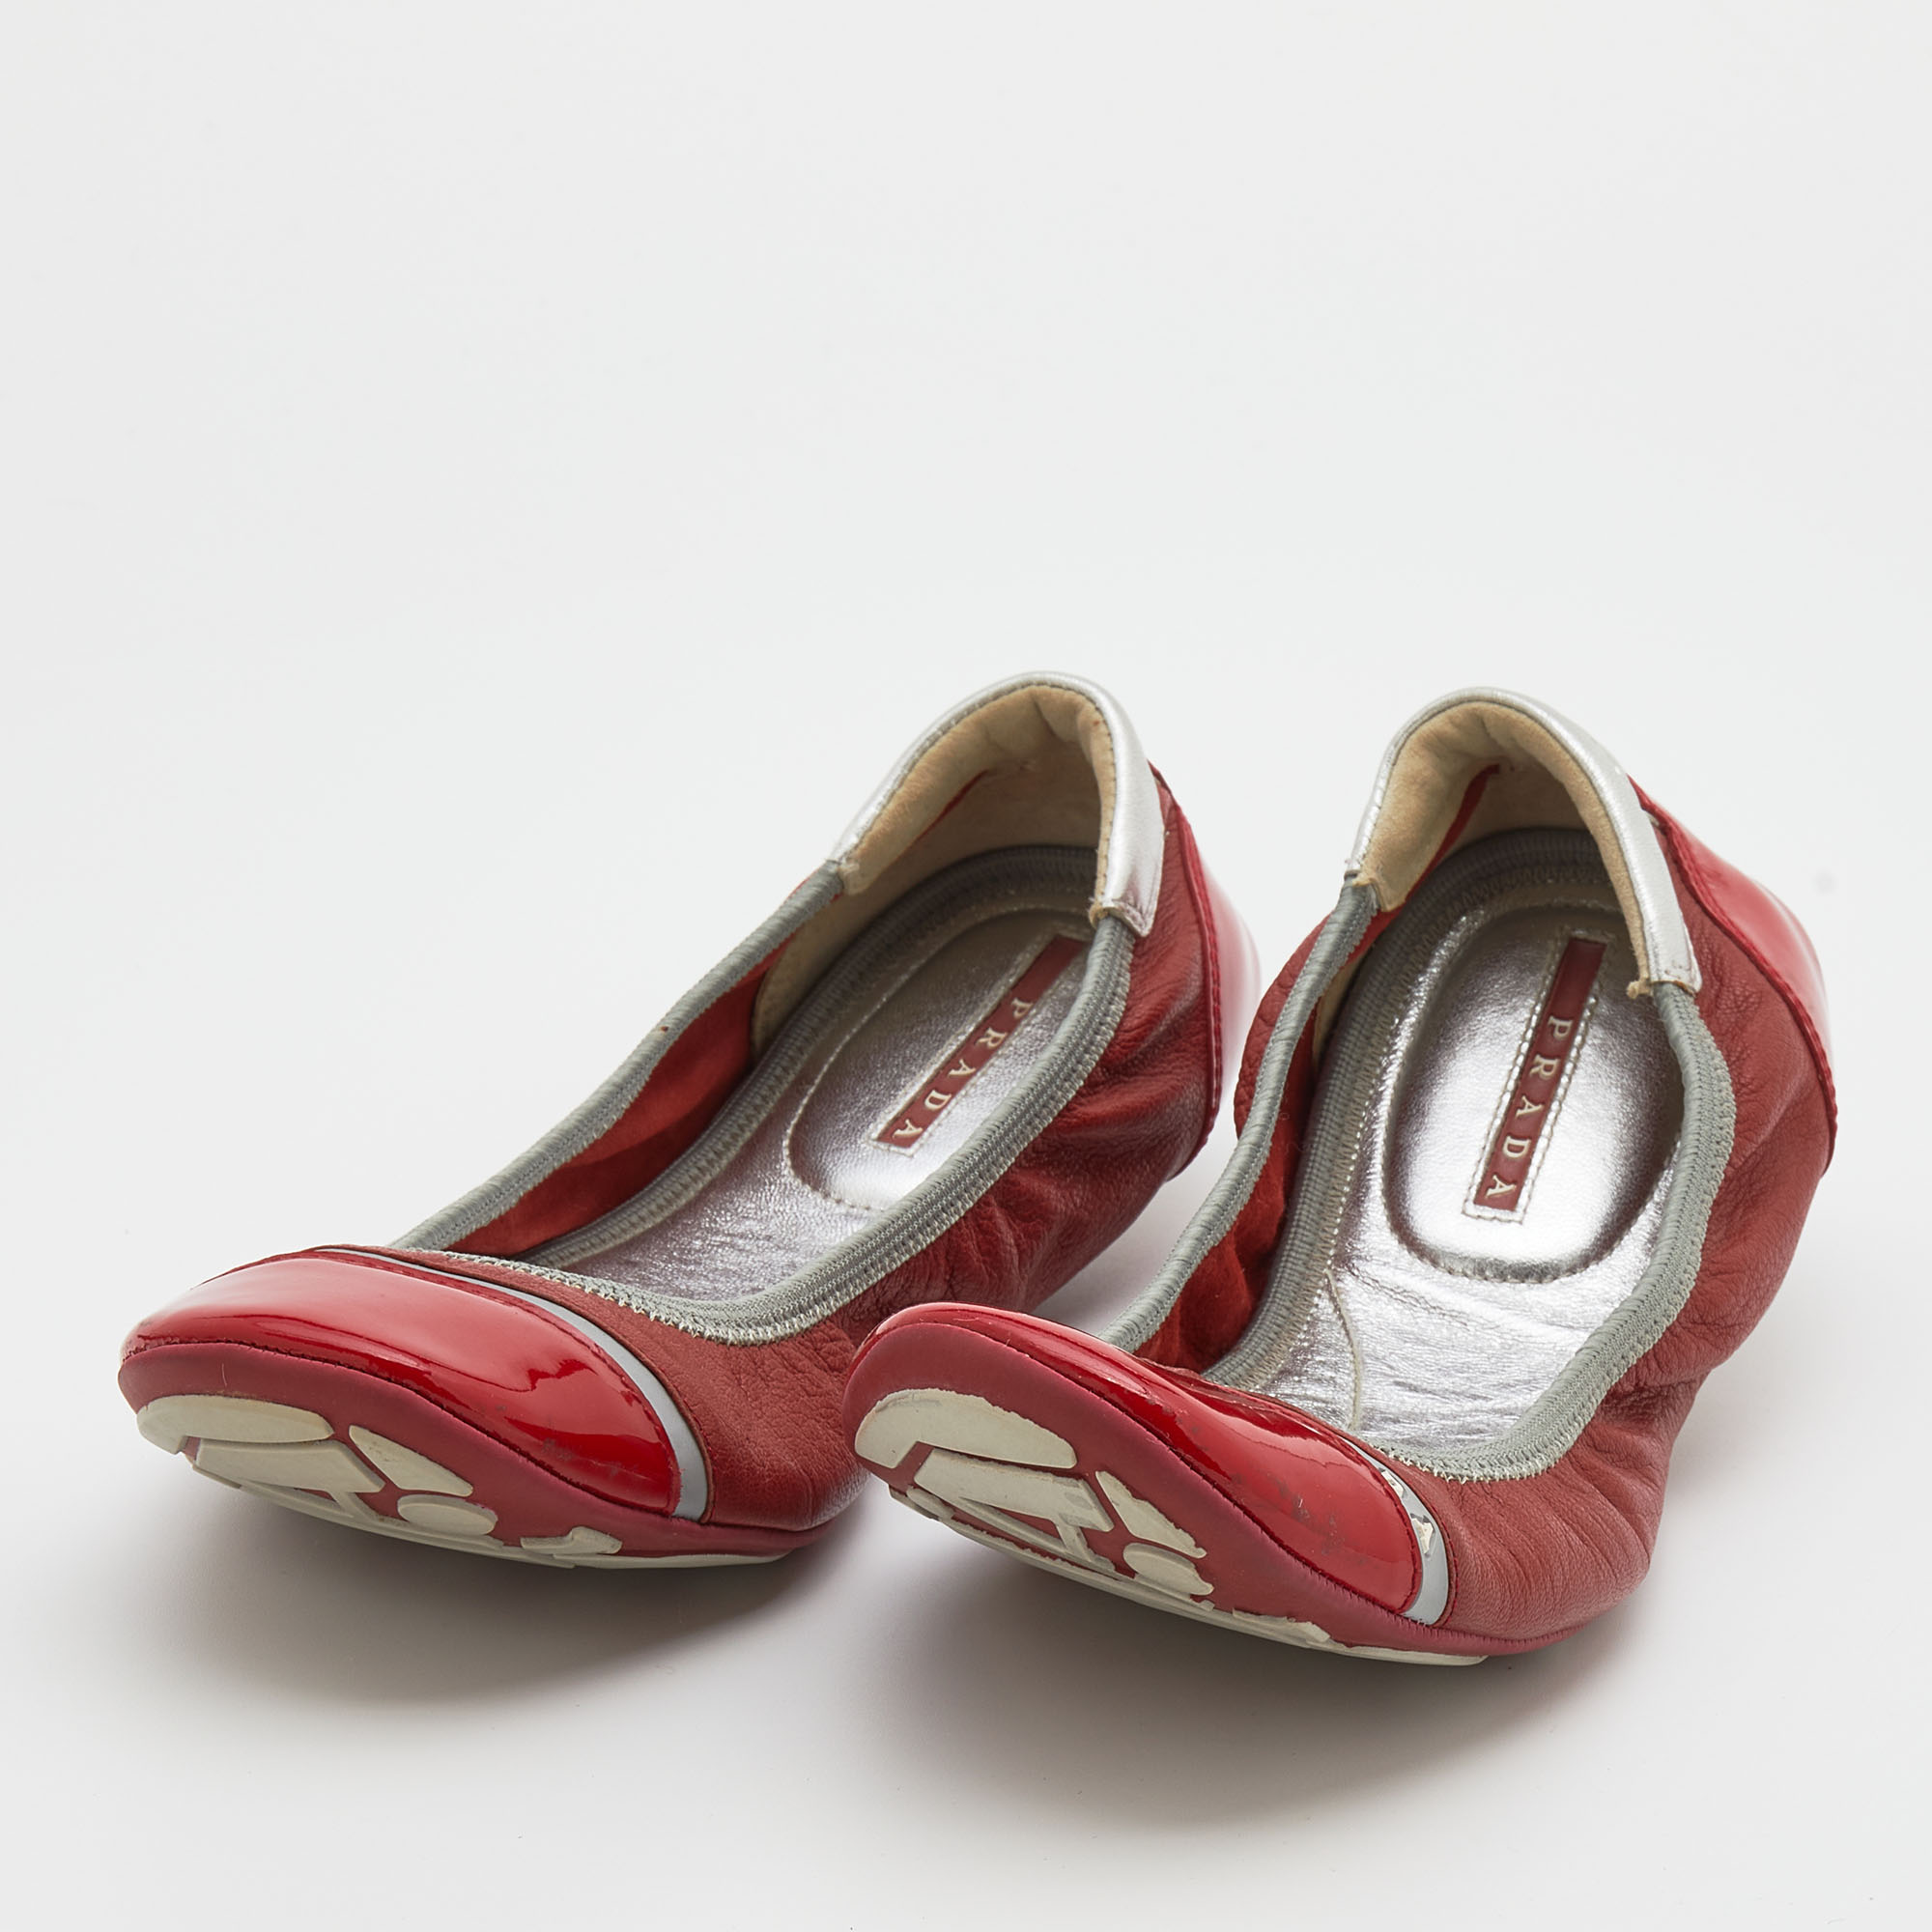 

Prada Red Patent Leather and Leather Scrunch Ballet Flats Size